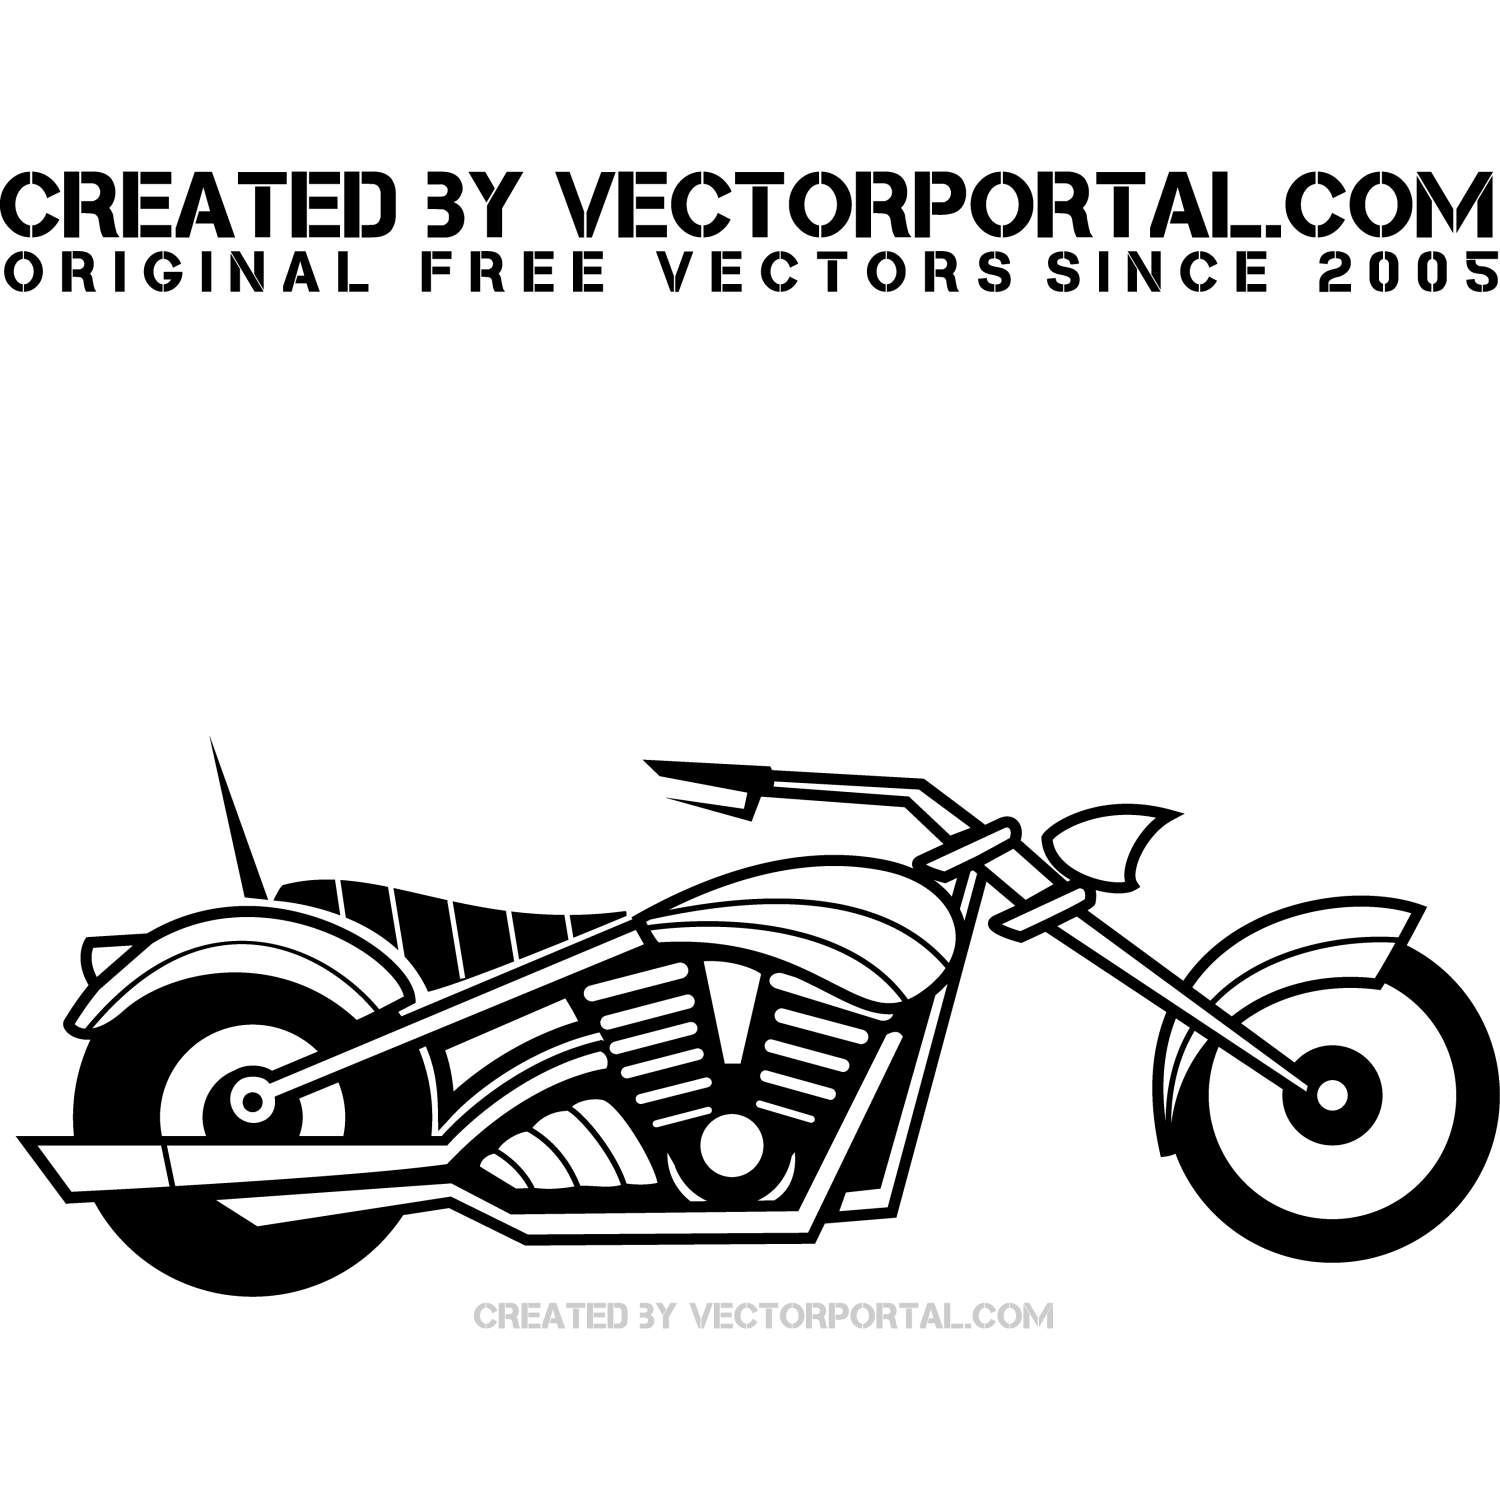 vector free download motorcycle - photo #9